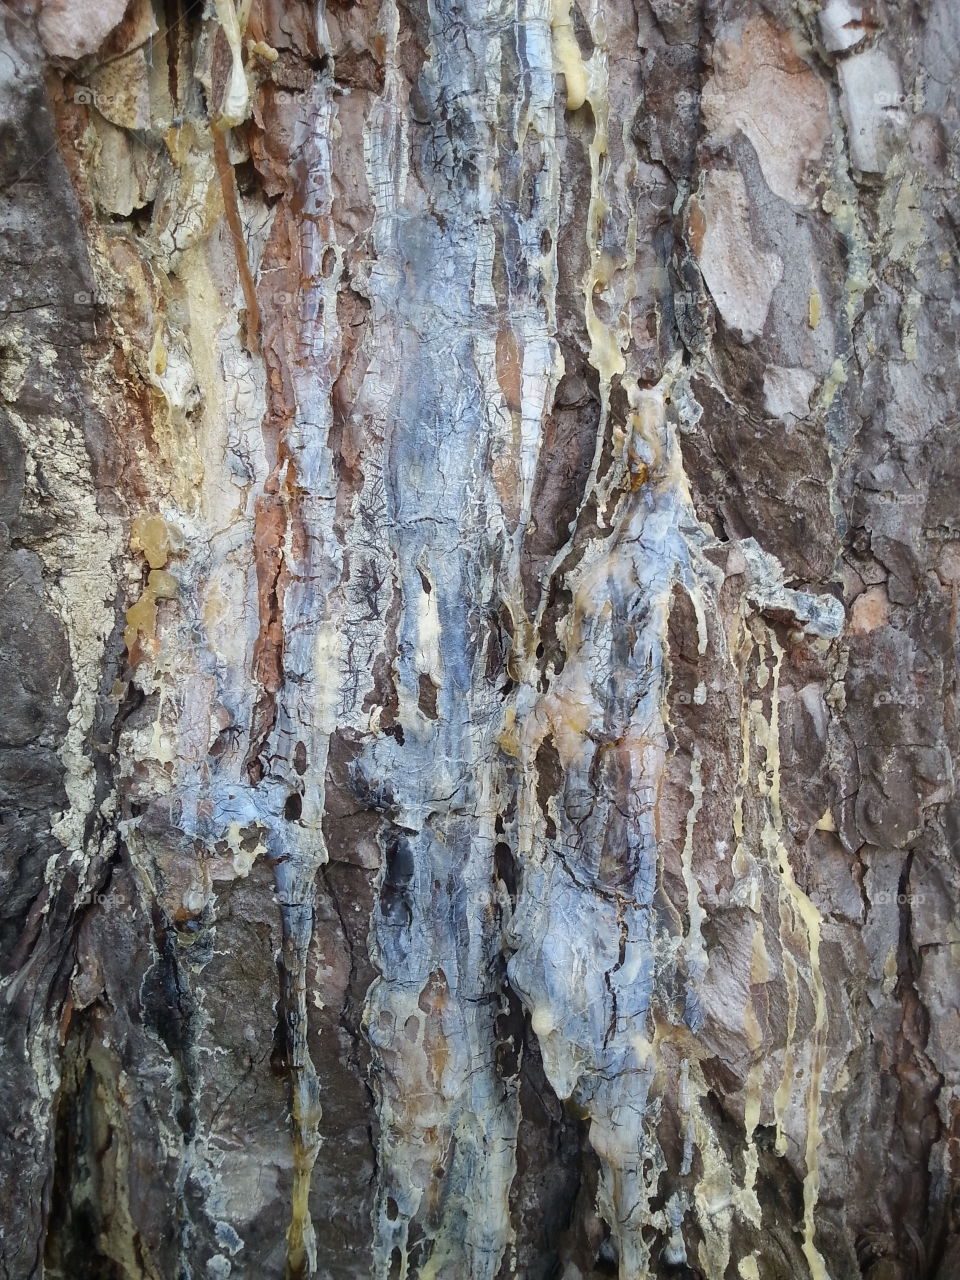 sap from a tree, no edits